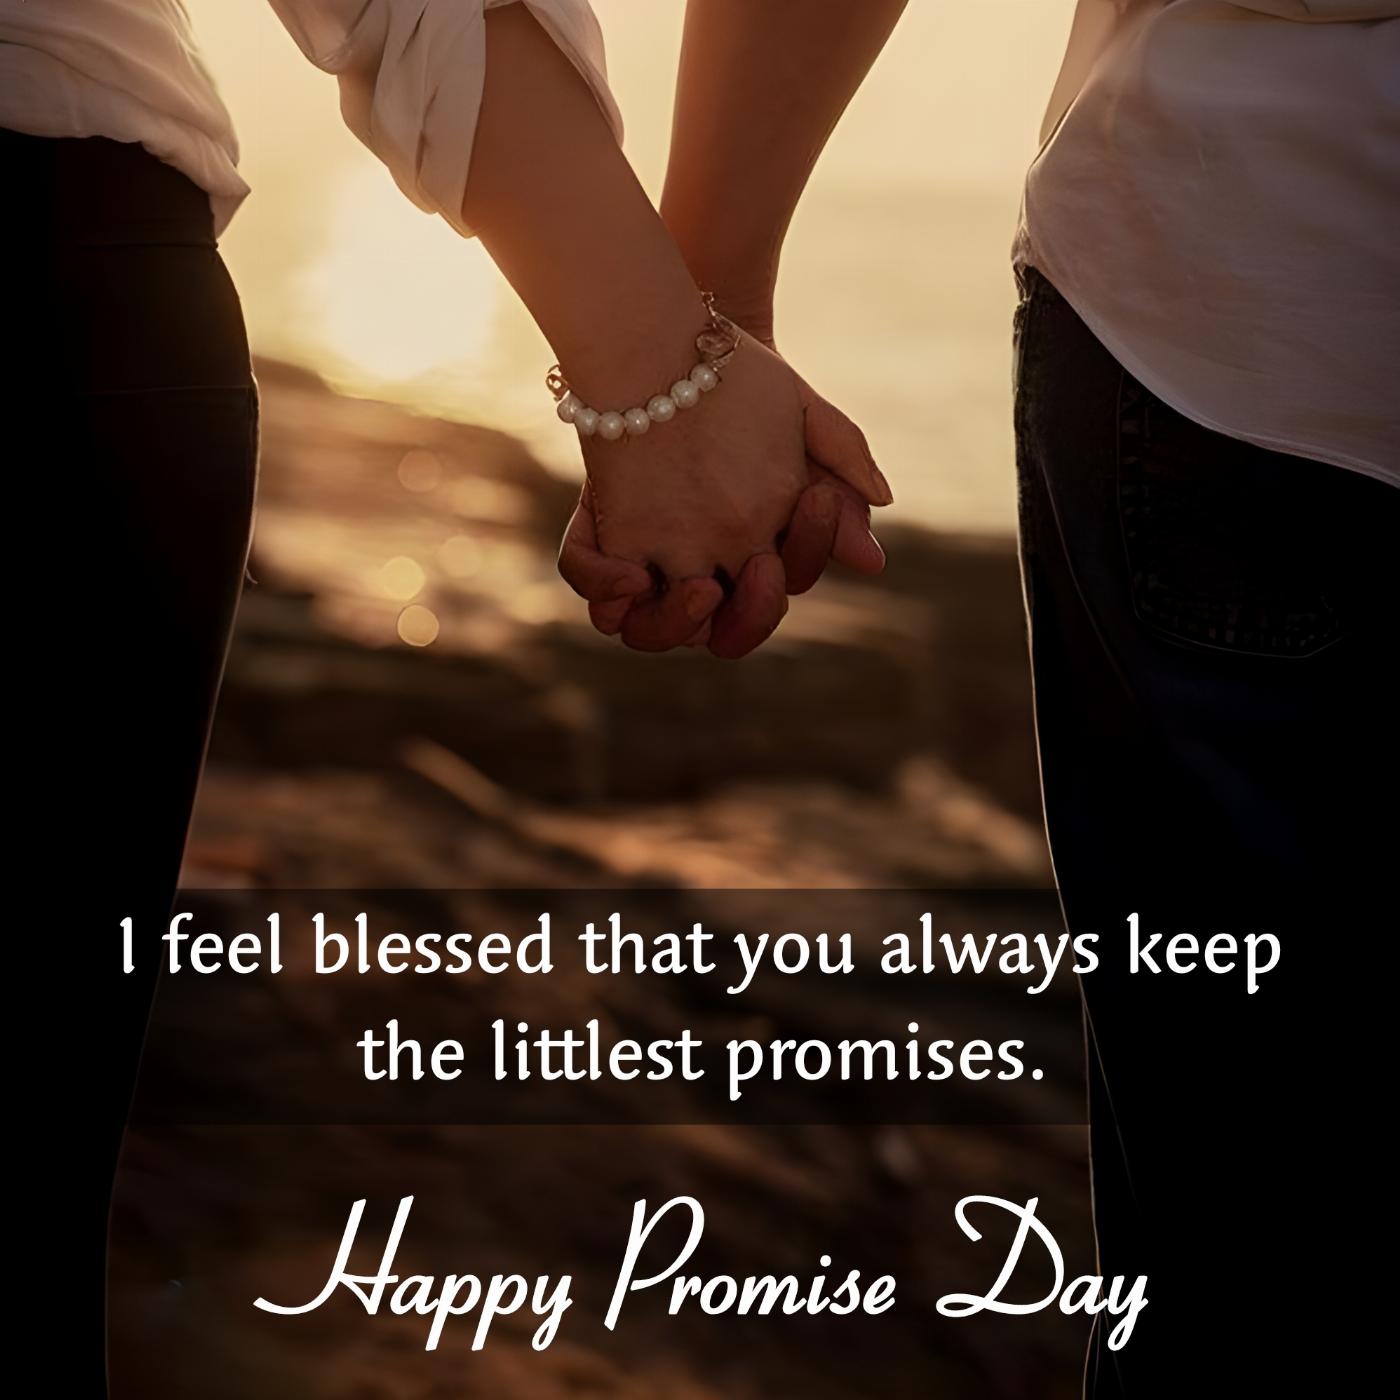 I feel blessed that you always keep the littlest promises